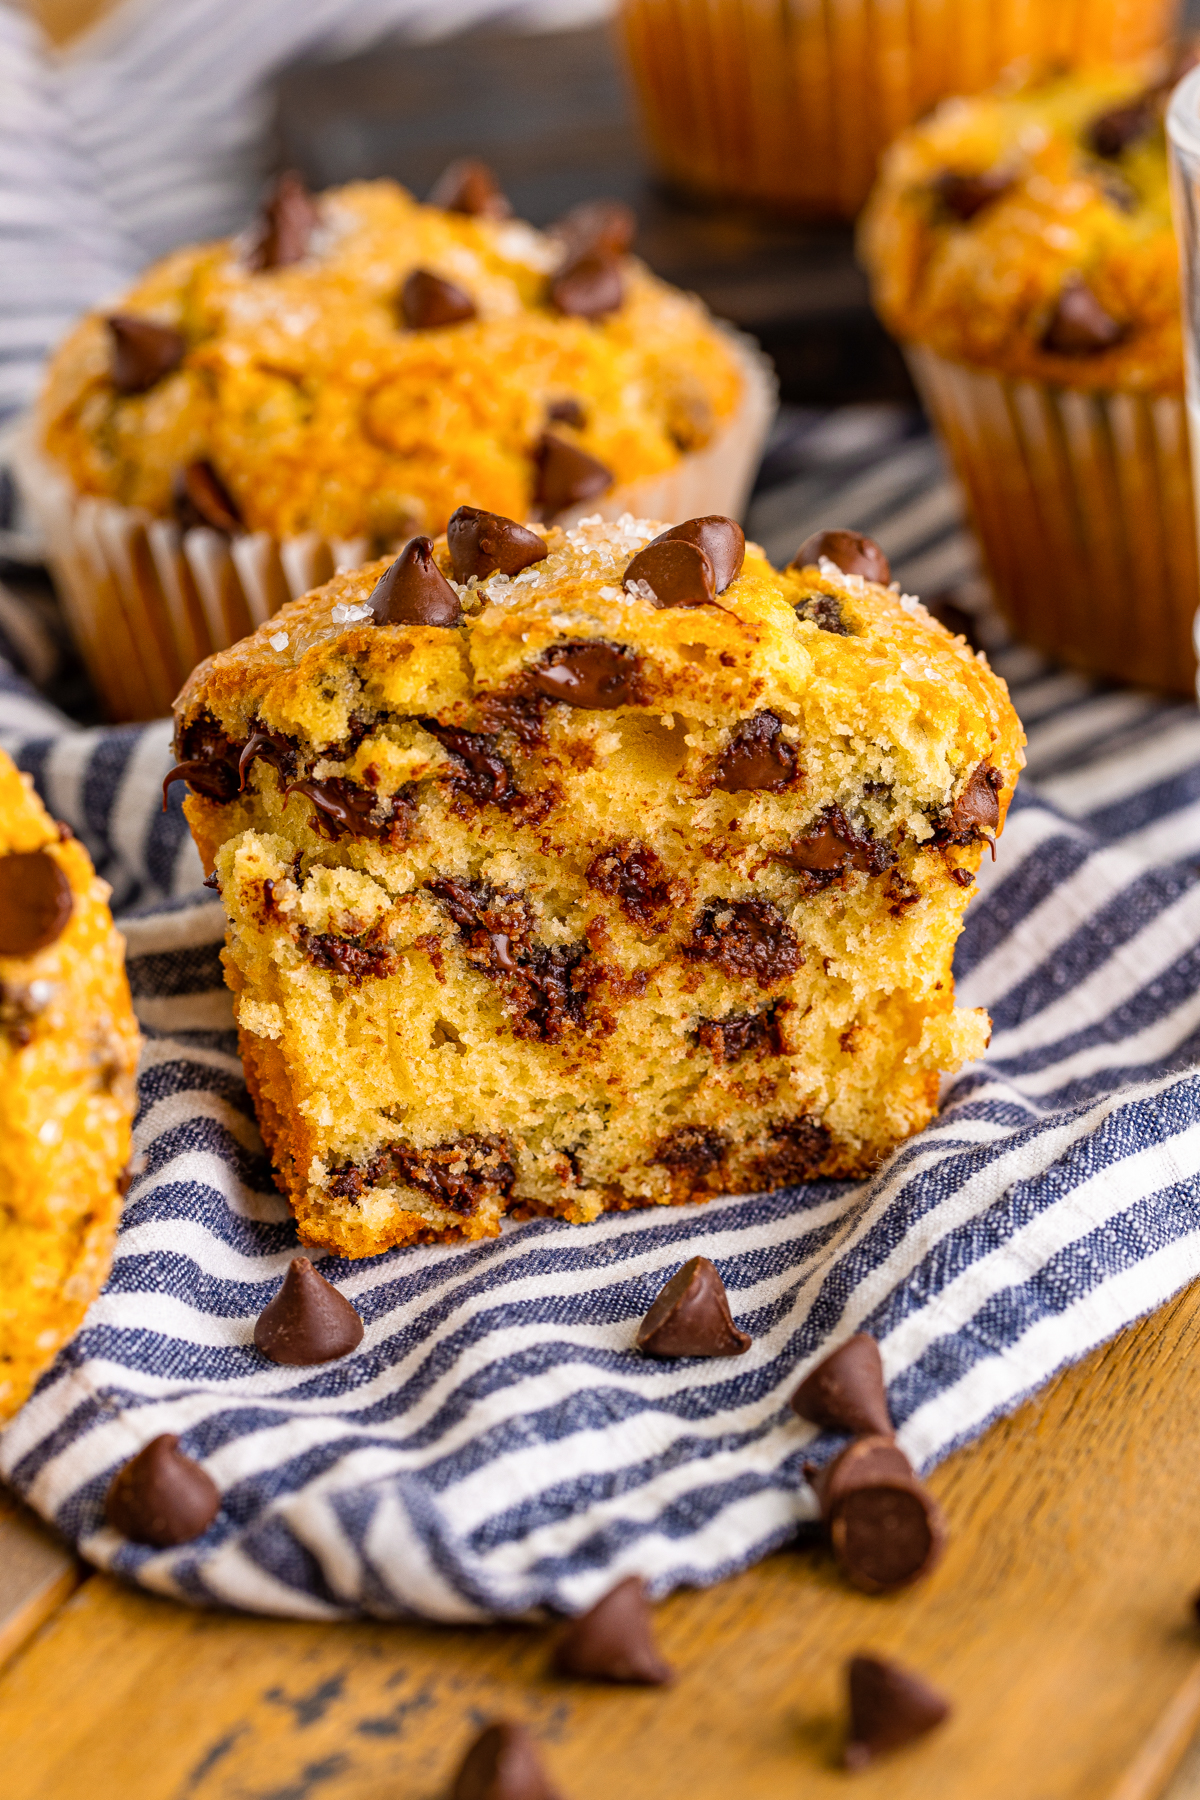 Bakery style jumbo chocolate chip muffin, broken open to show how it is packed with chocolate chips.